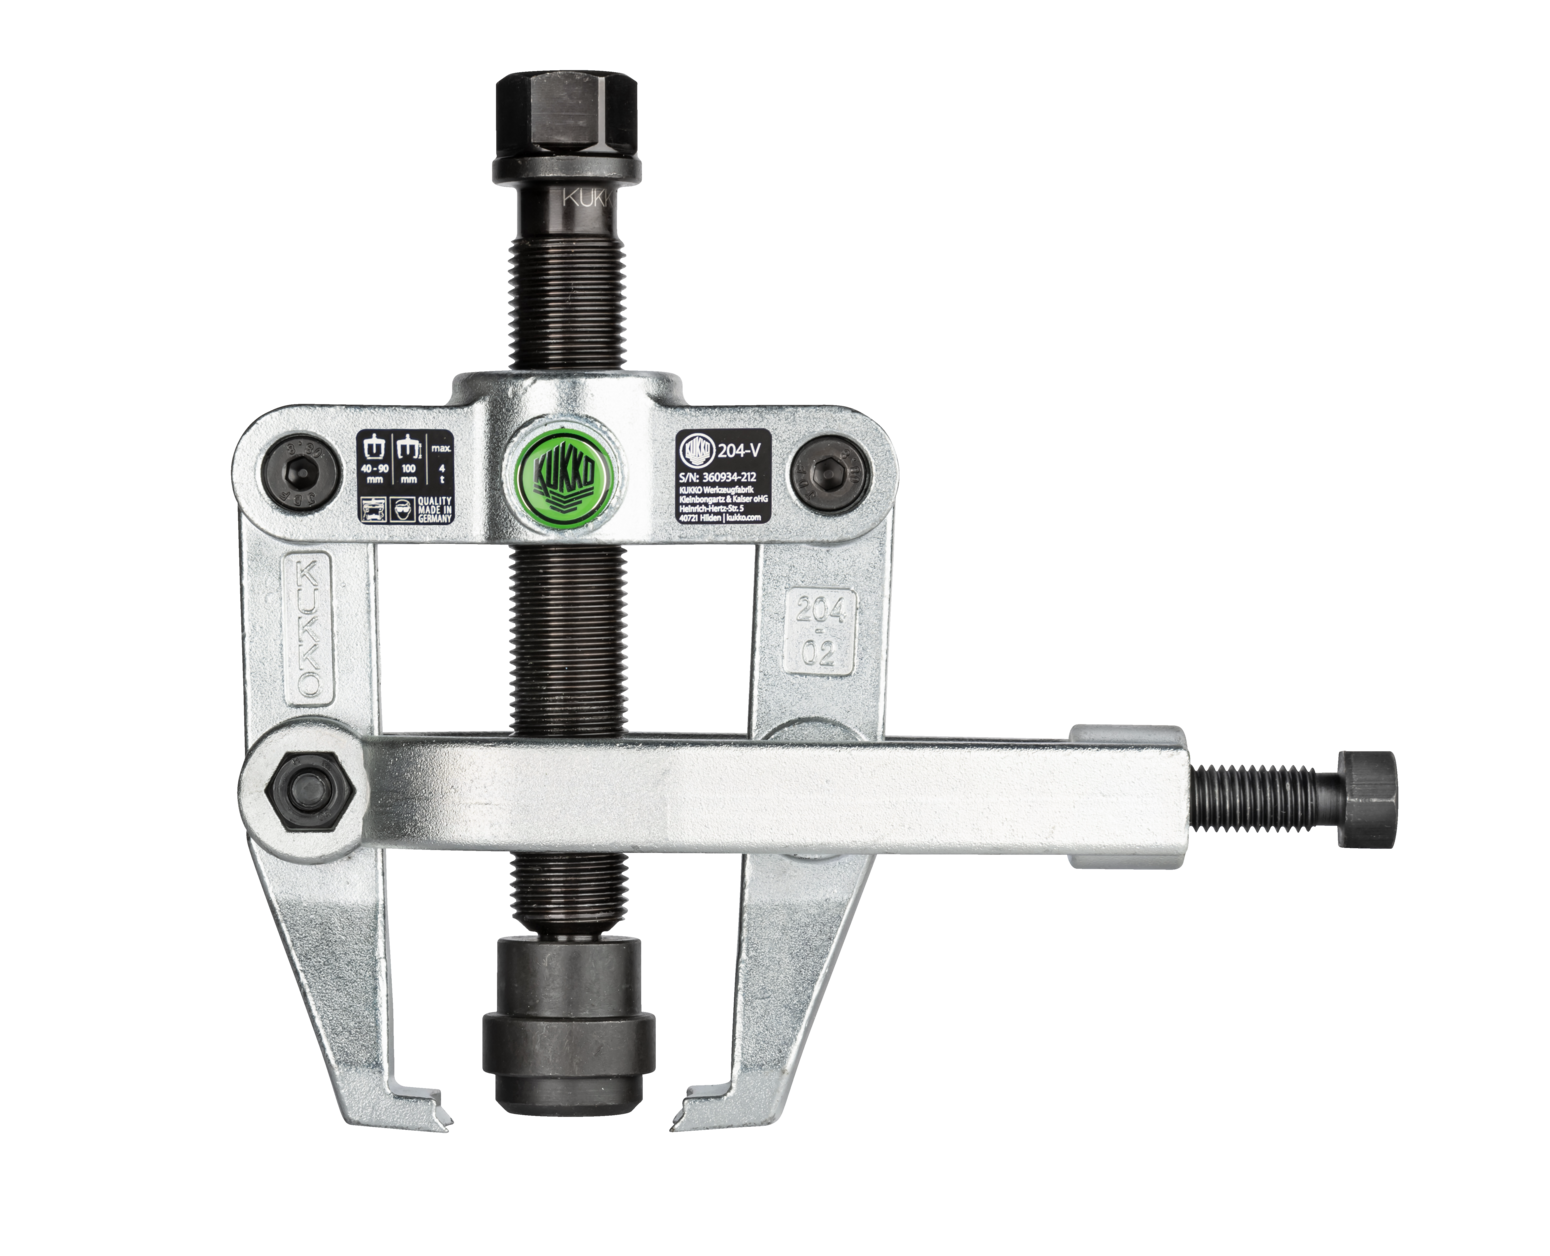 Product 204-V | 2-arm bearing puller with side clamp and adapter